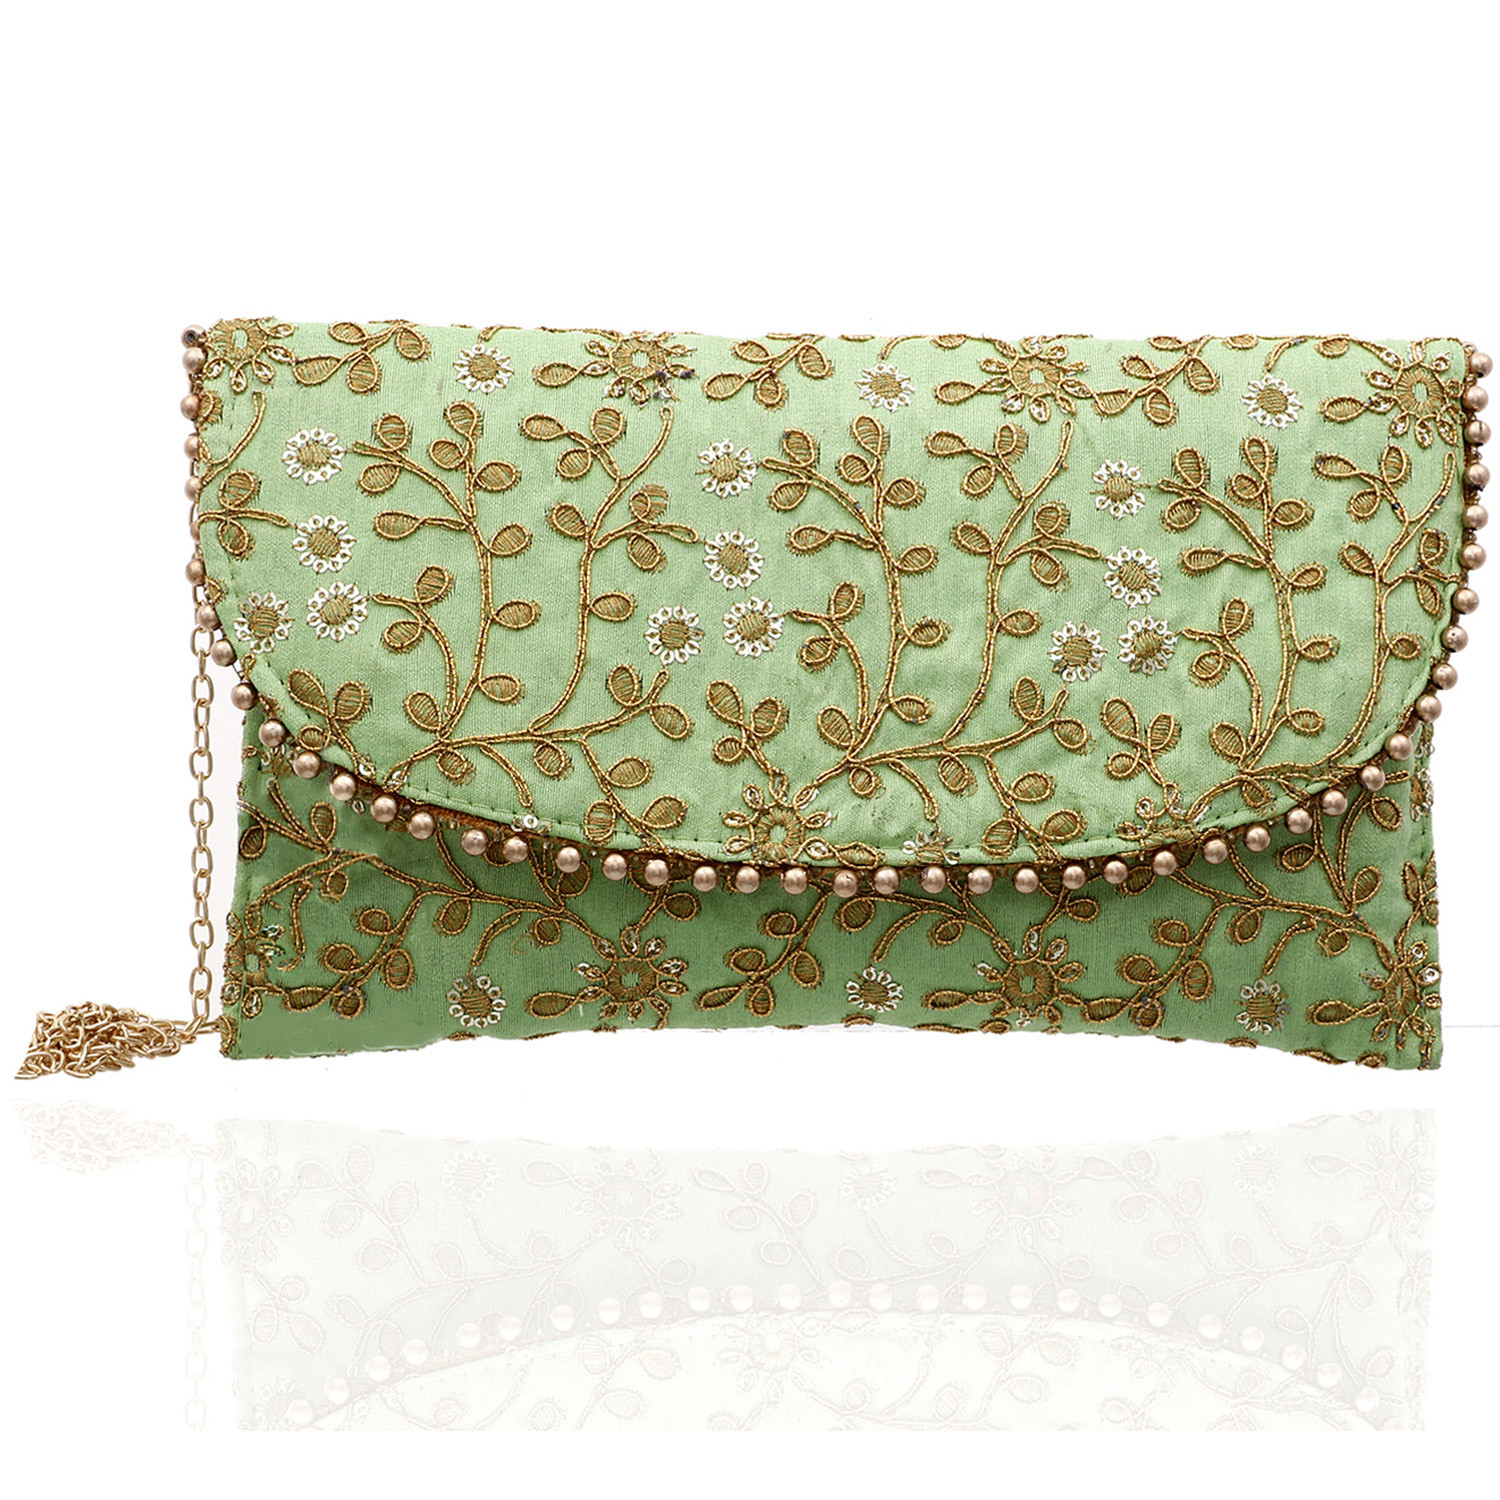 Kuber Industries Embroidery Golden Pearl Border Clutch|Hand Purse & Pearls Handle With Magnetic Lock For Woman,Girls (Green)